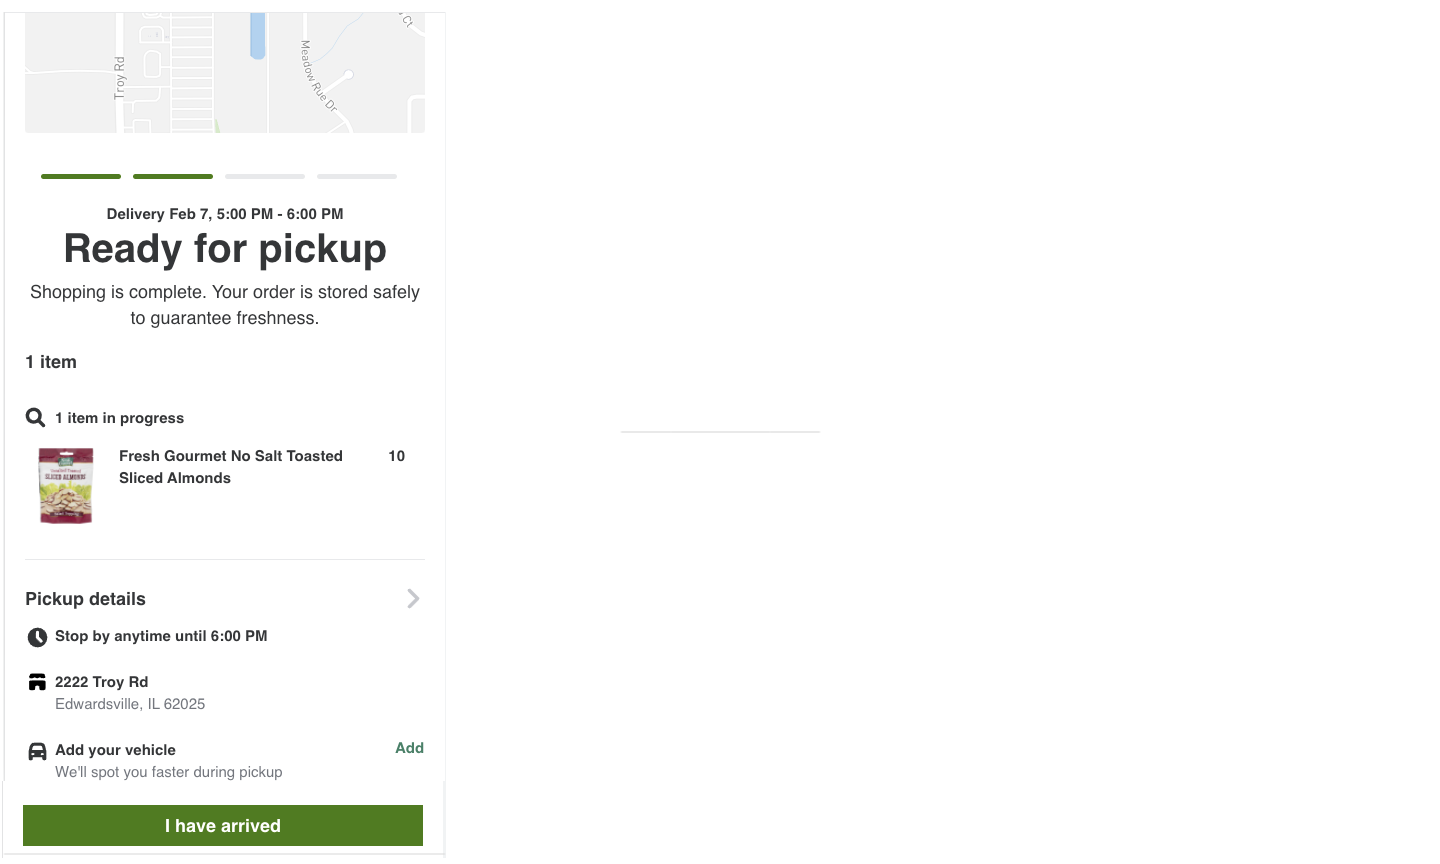 The image shows the status &quot;Ready for pickup&quot; and the text &quot;Shopping is complete. Your order is stored safely to guarantee freshness.&quot; The order contains one item: Sliced Almonds with a quantity of 10. The &quot;Pickup details&quot; section shows the text &quot;Stop by anytime until 6:00 pm&quot;, the store address, and the text &quot;Add your vehicle&quot; with an Add link.